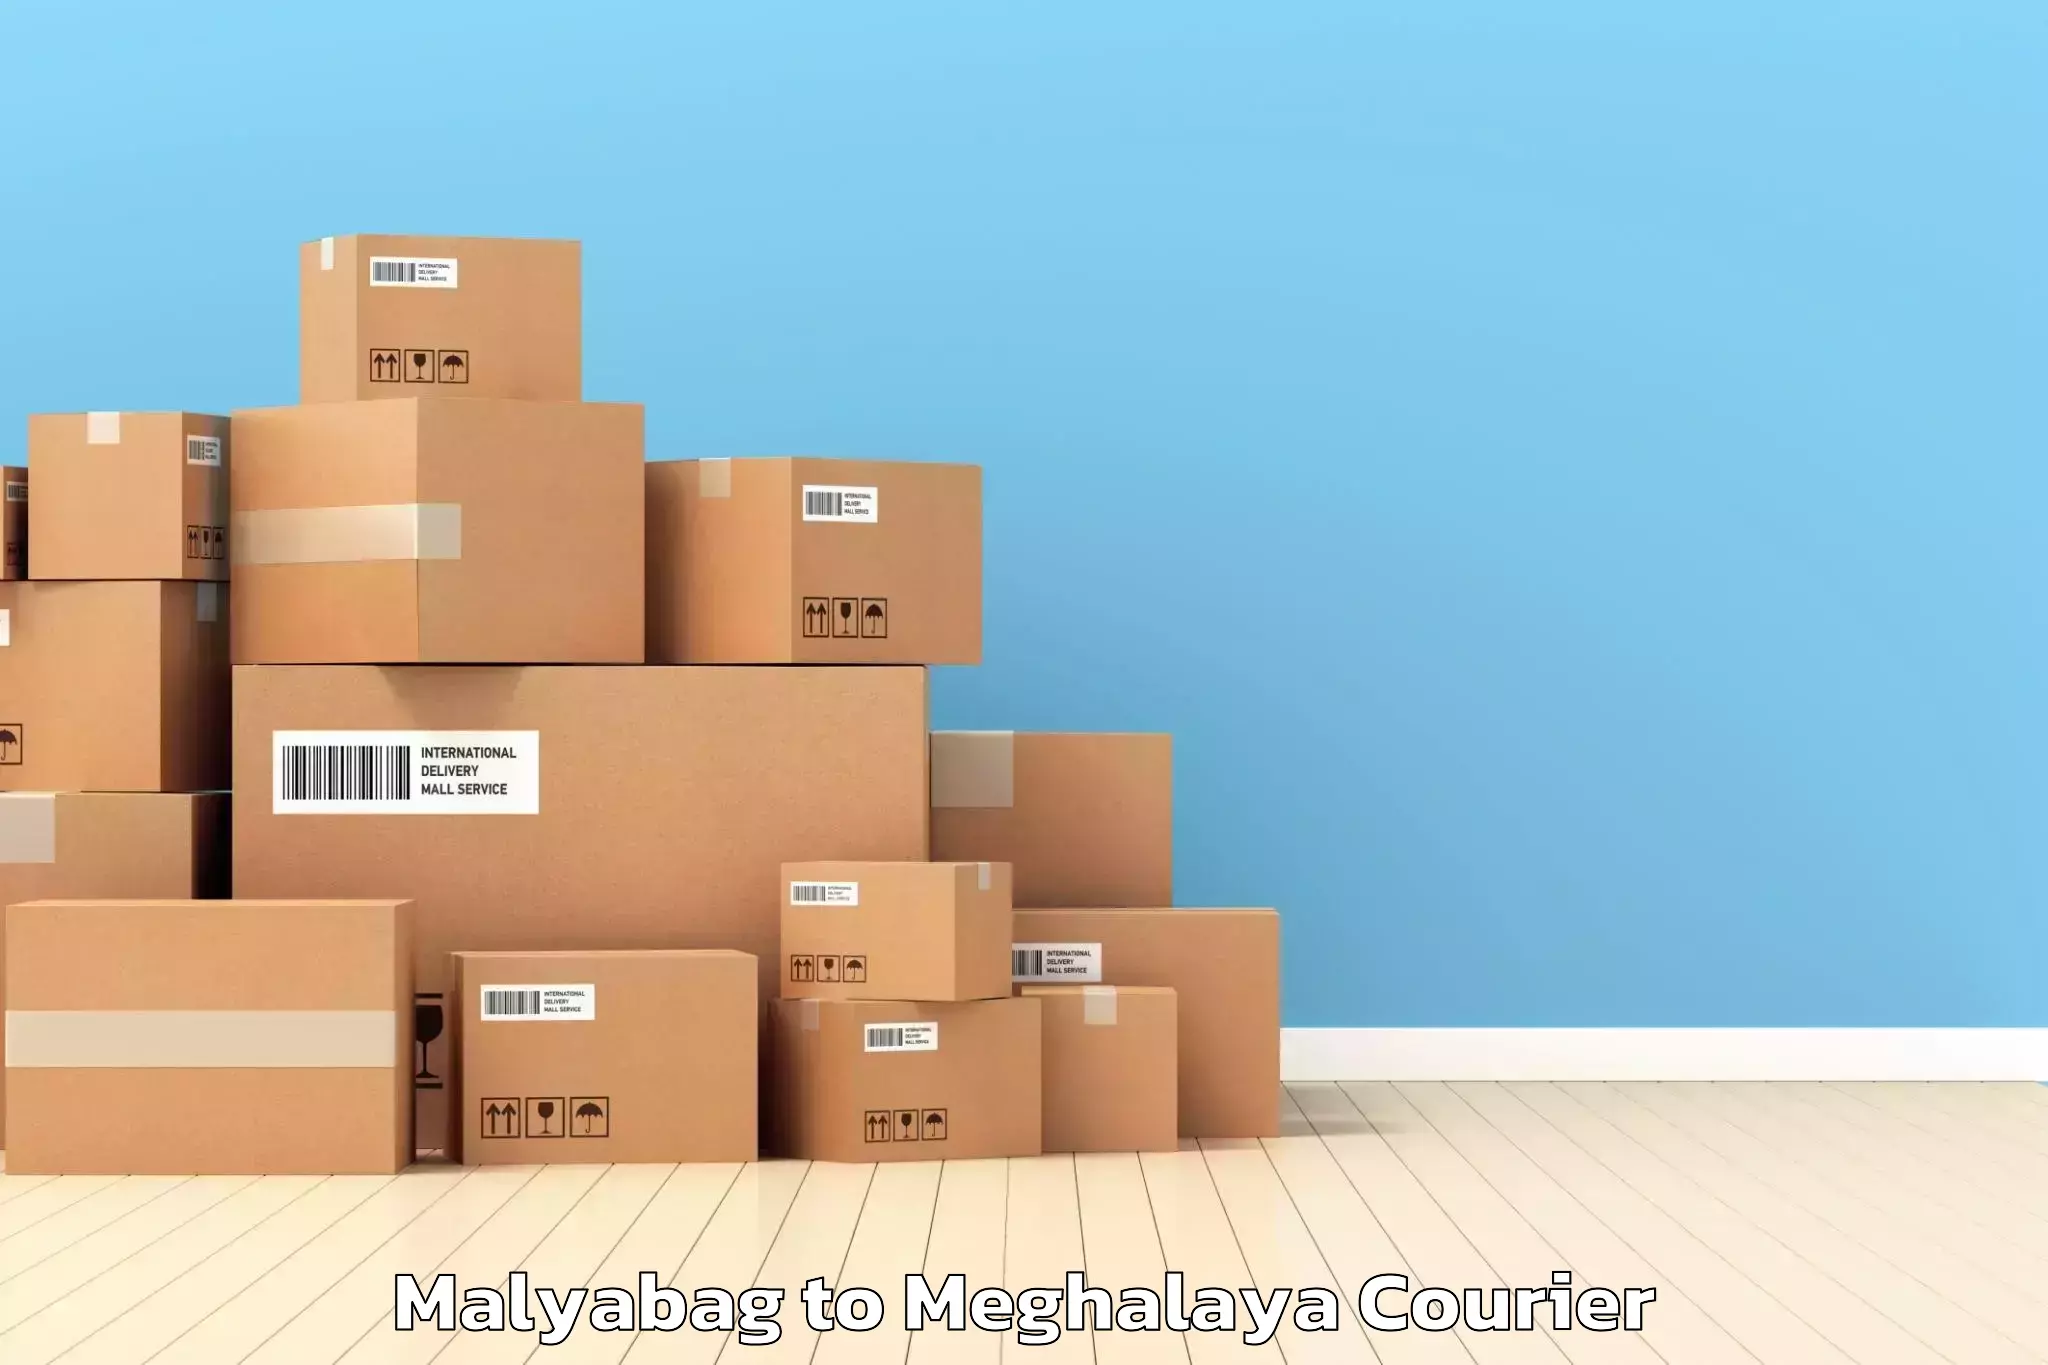 Full-service movers in Malyabag to Phulbari